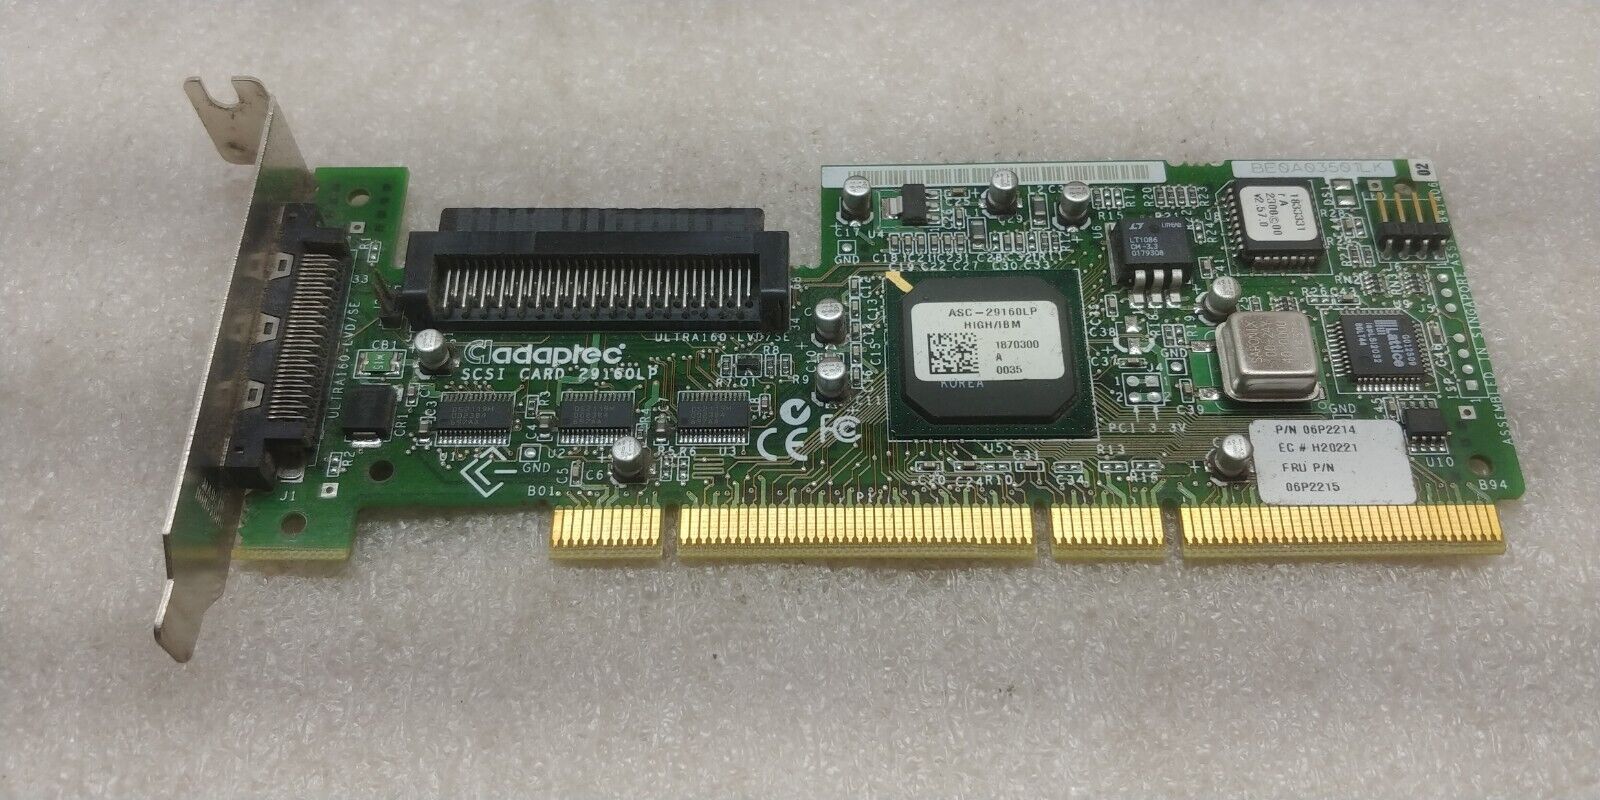 Adaptec SCSI Card 29160 LP RoHS Single GREAT CONDITION 